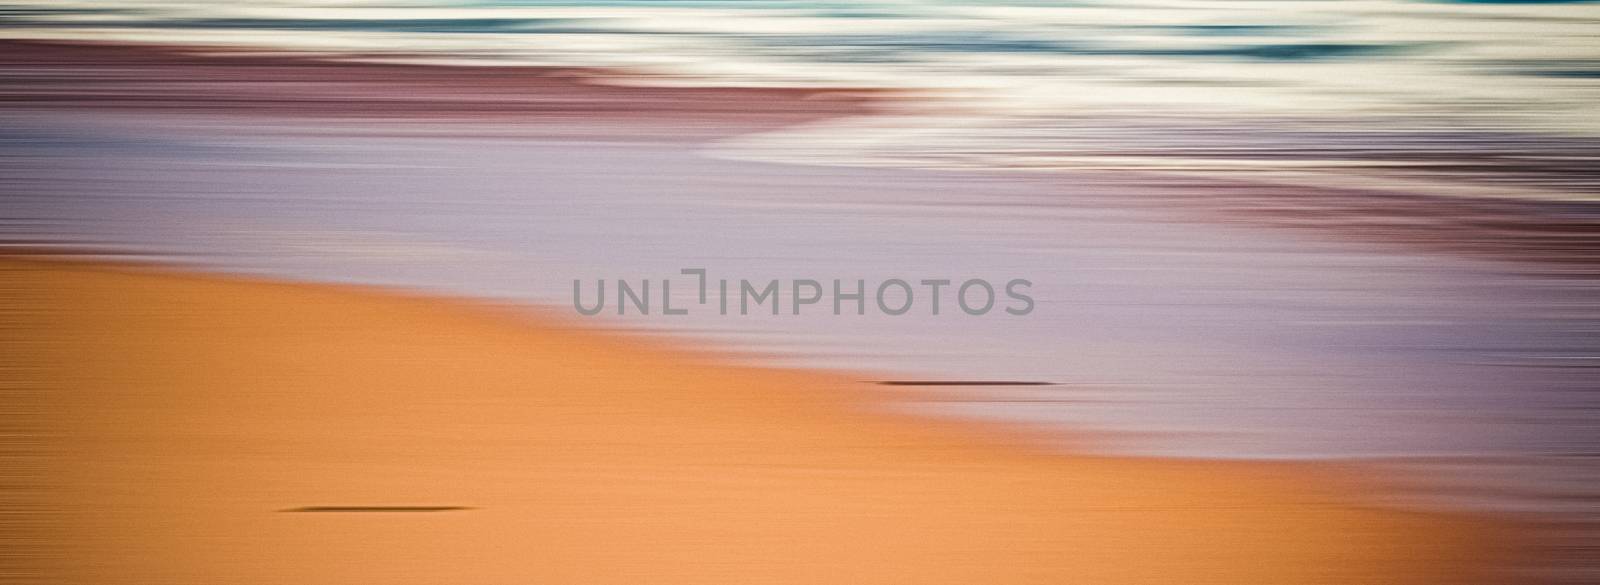 Seascape, seaview and coastline concept - Abstract vintage coastal nature background, long exposure view of dreamy ocean coast, sea retro art print, beach holiday destination for luxury travel brand